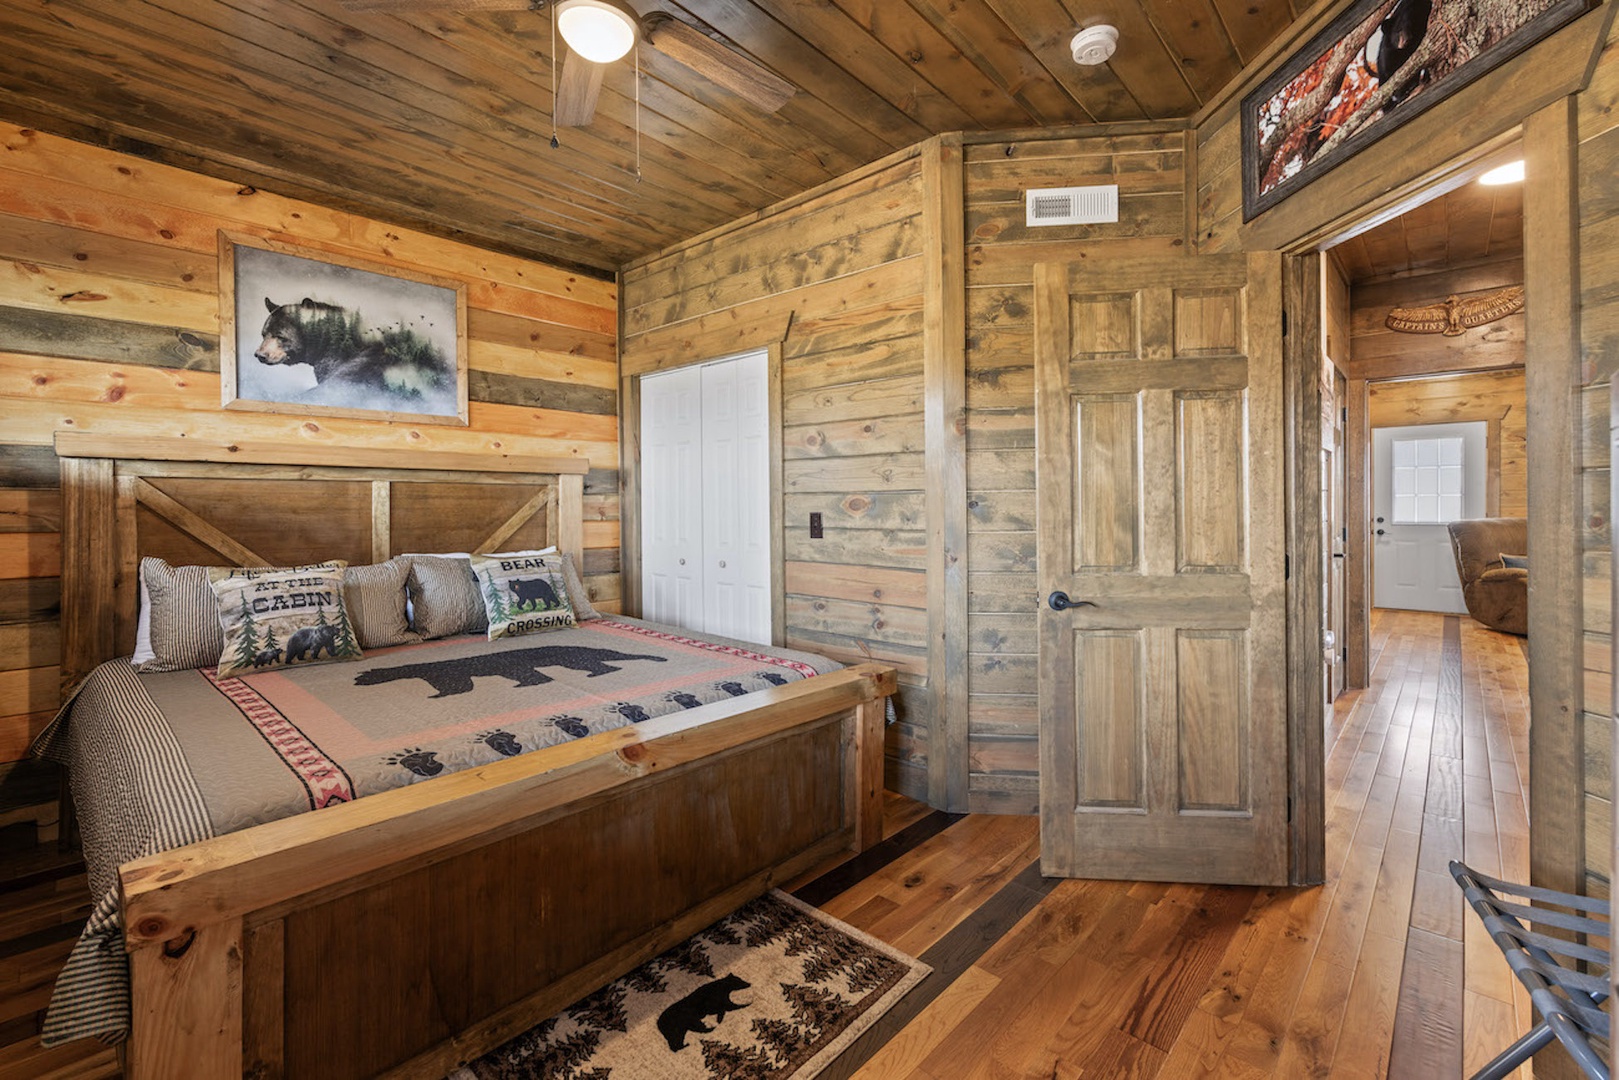 The second bedroom retreat features a king bed, Smart TV, & balcony access